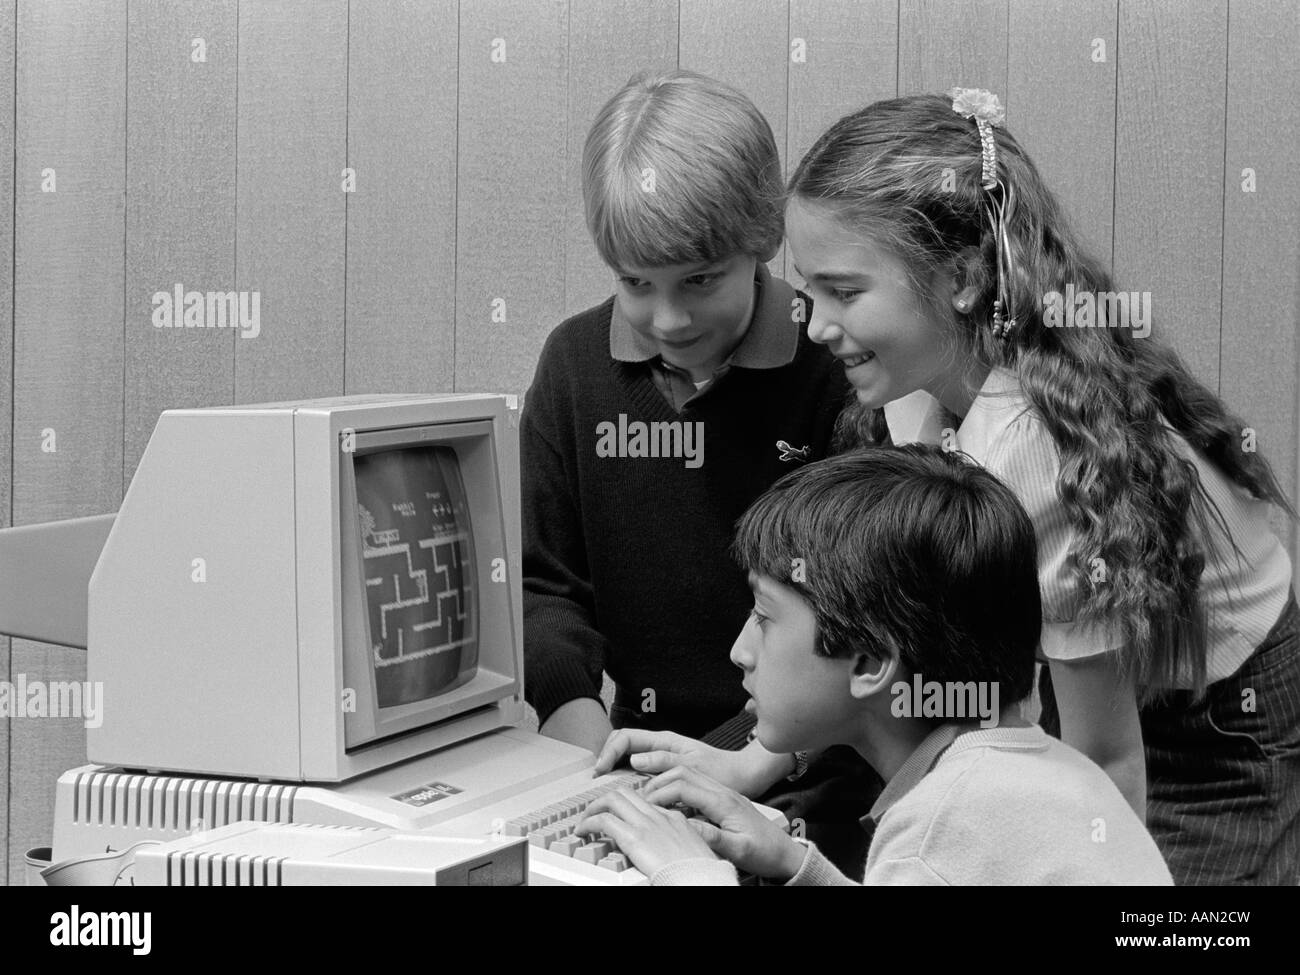 1980s BOY SITTING IN FRONT OF COMPUTER PLAYING GAMES BOY & GIRL LOOKING ON OVER HIS SHOULDER Stock Photo